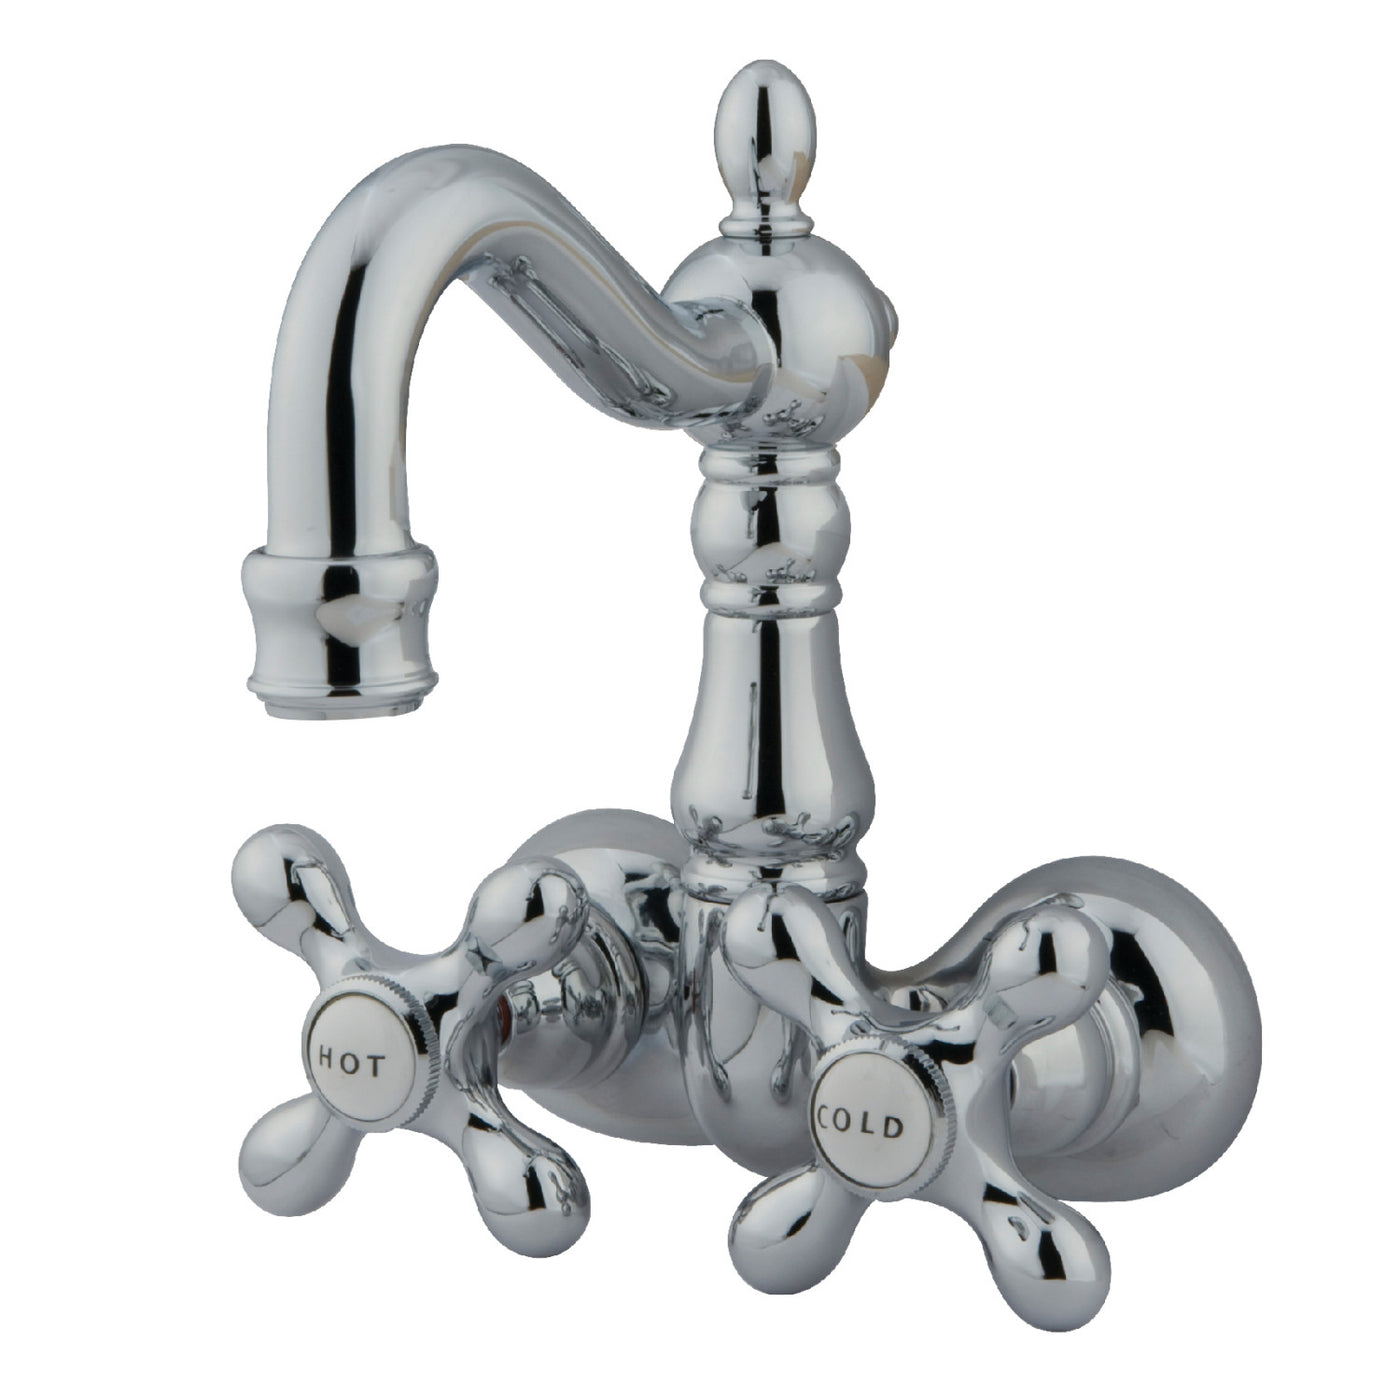 Elements of Design DT10721AX 3-3/8-Inch Wall Mount Tub Faucet, Polished Chrome